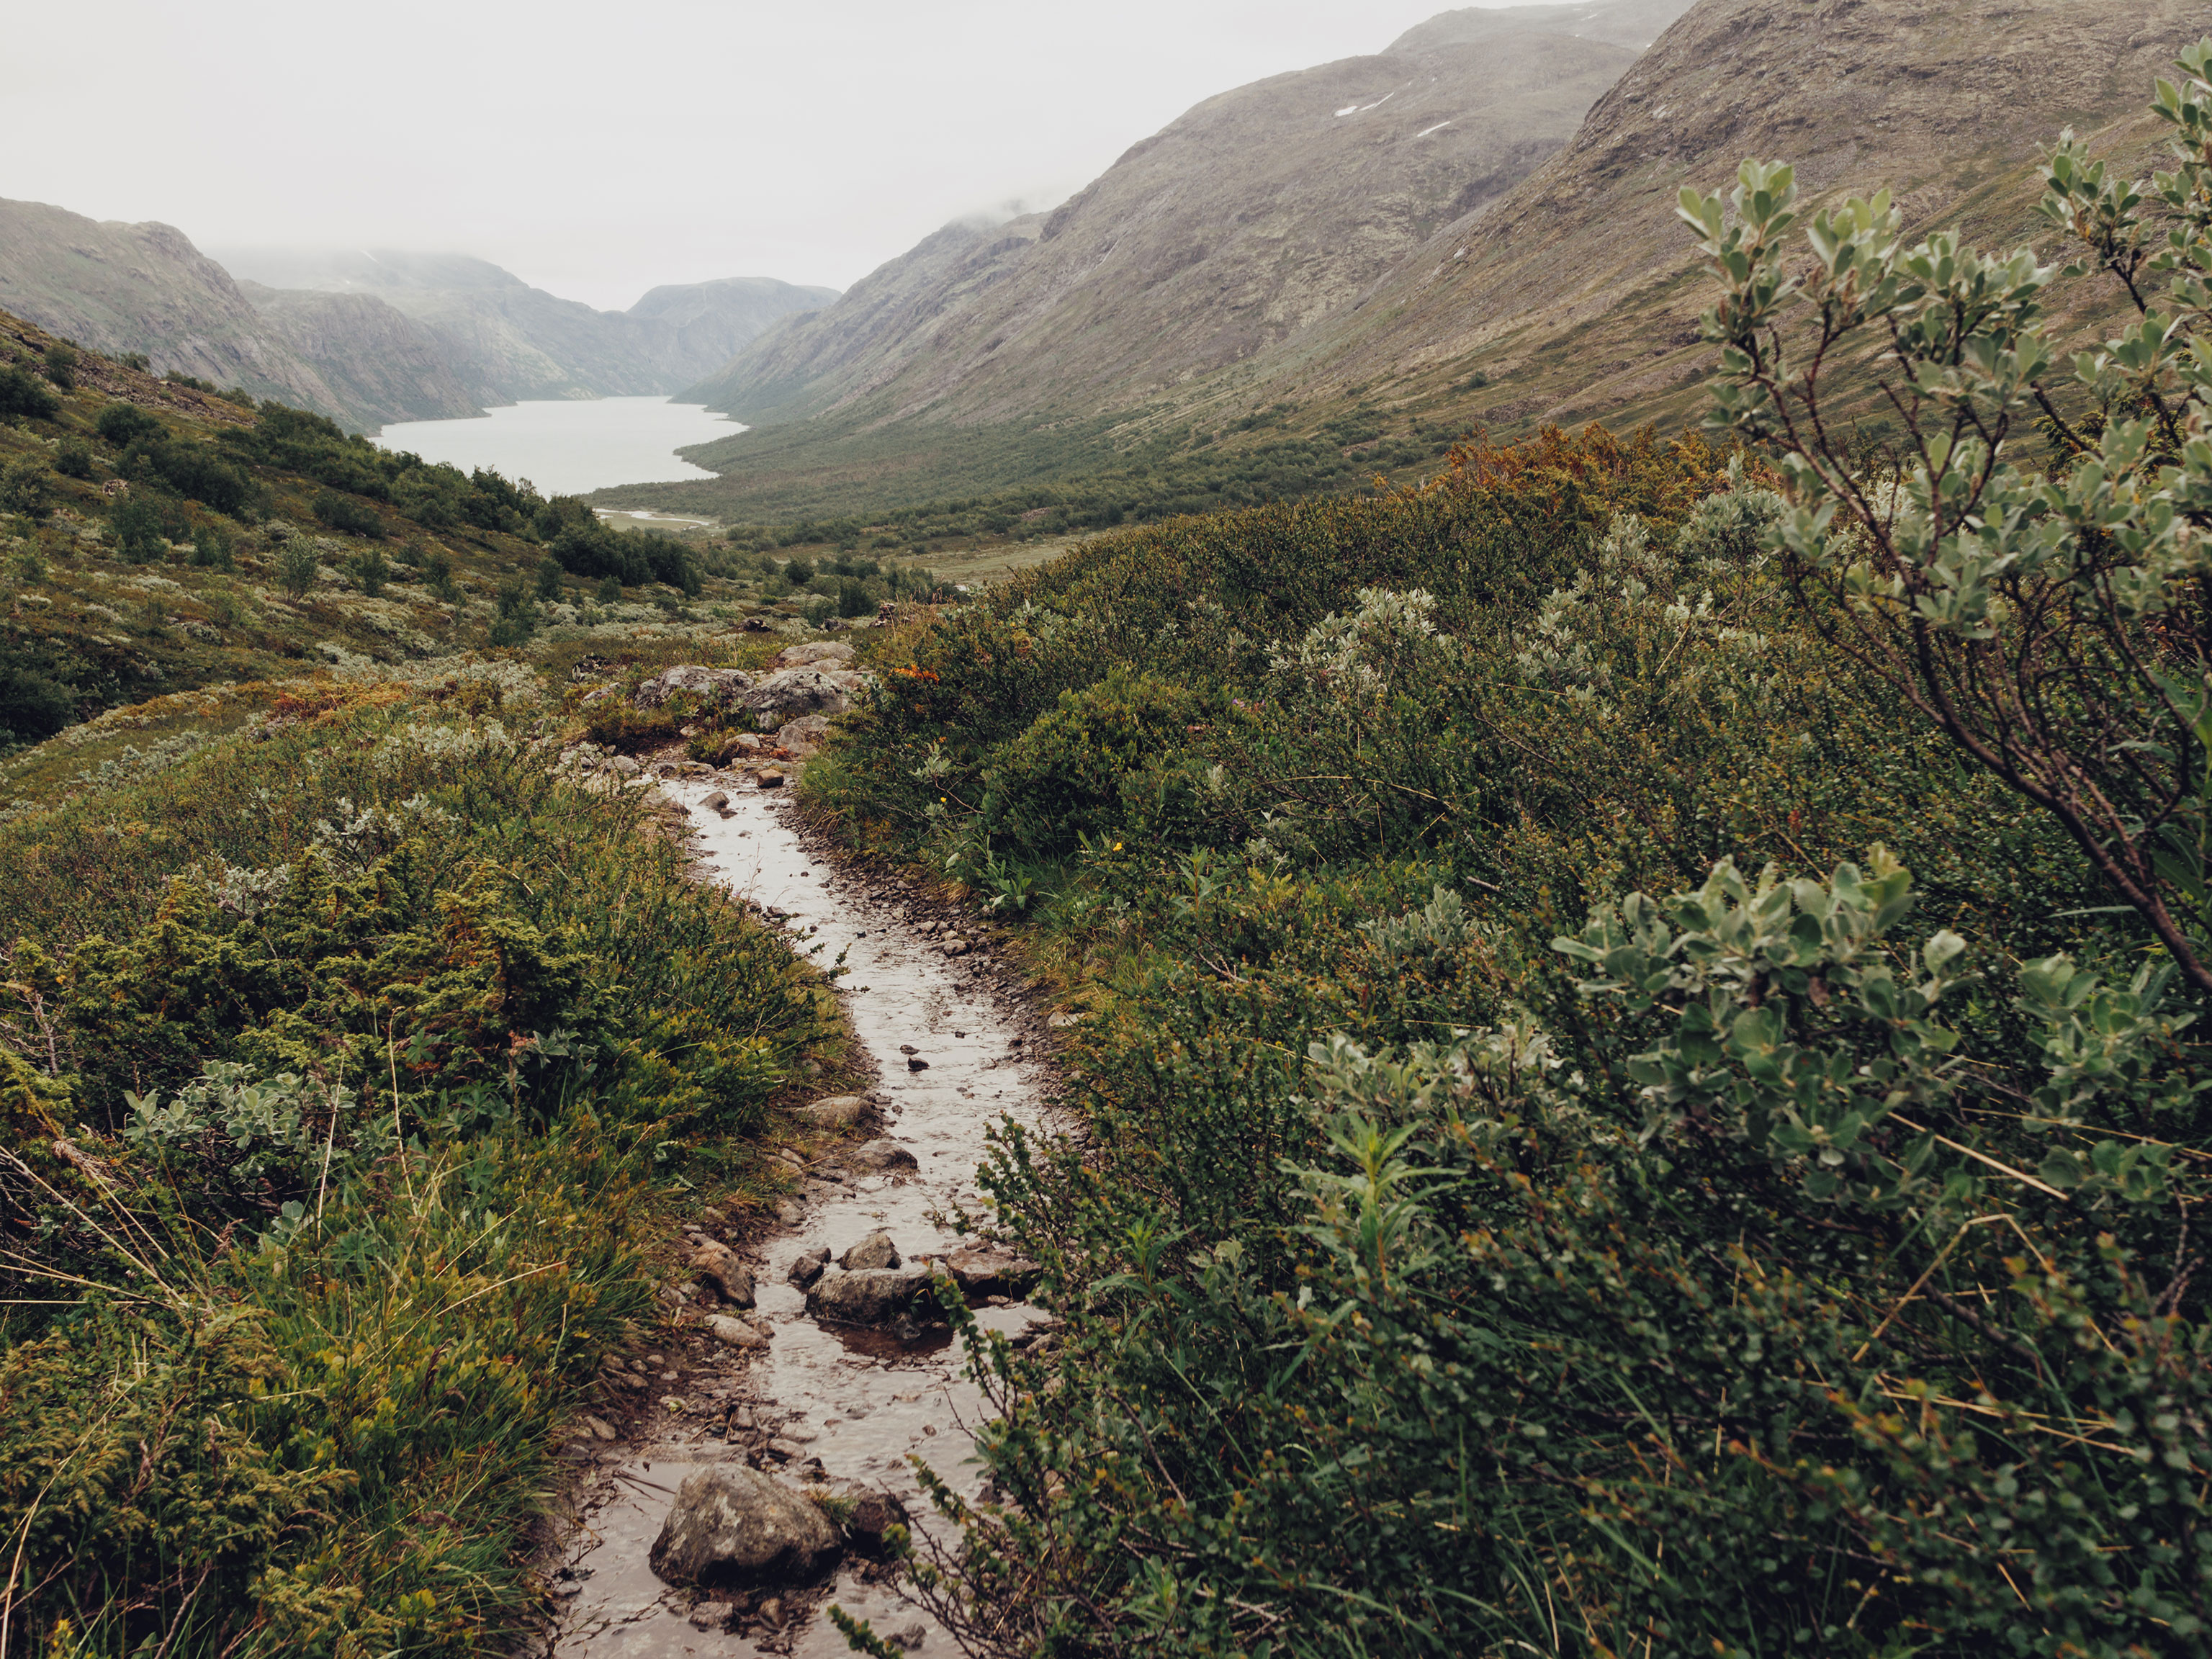 A narrow path leads down to a lake in the Jotunheimen national park